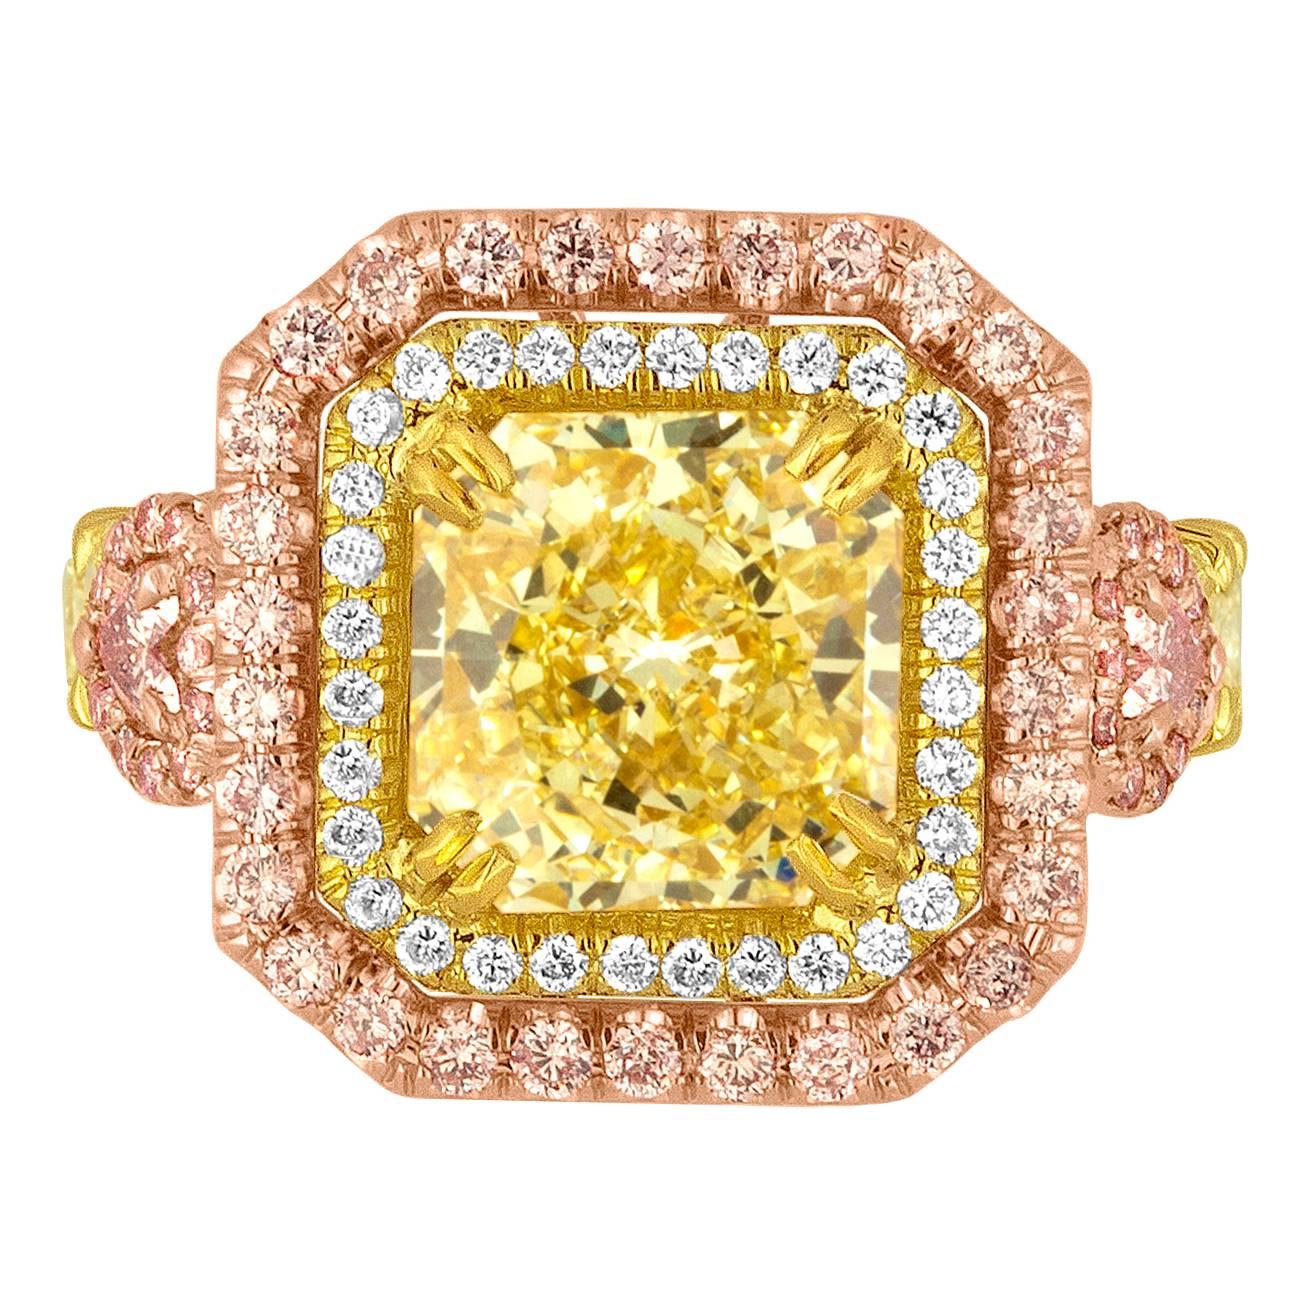 GIA Fancy Yellow 4.02 Carat Diamond Accented With Fancy Pink Diamonds